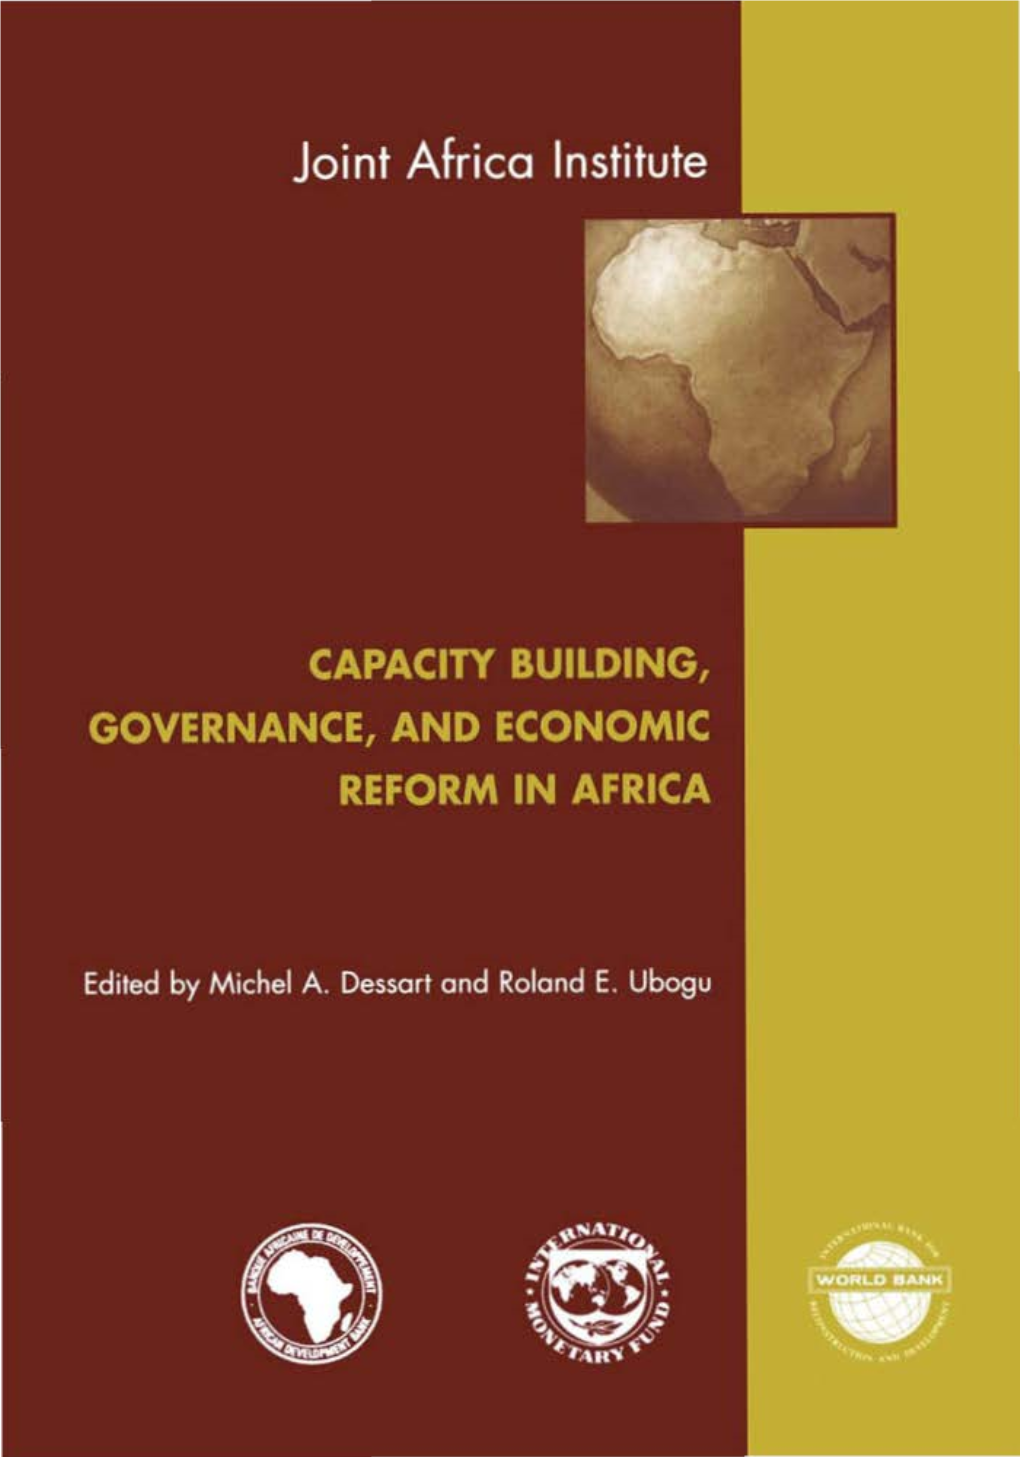 Capacity Building, Governance, and Economic Reform in Africa